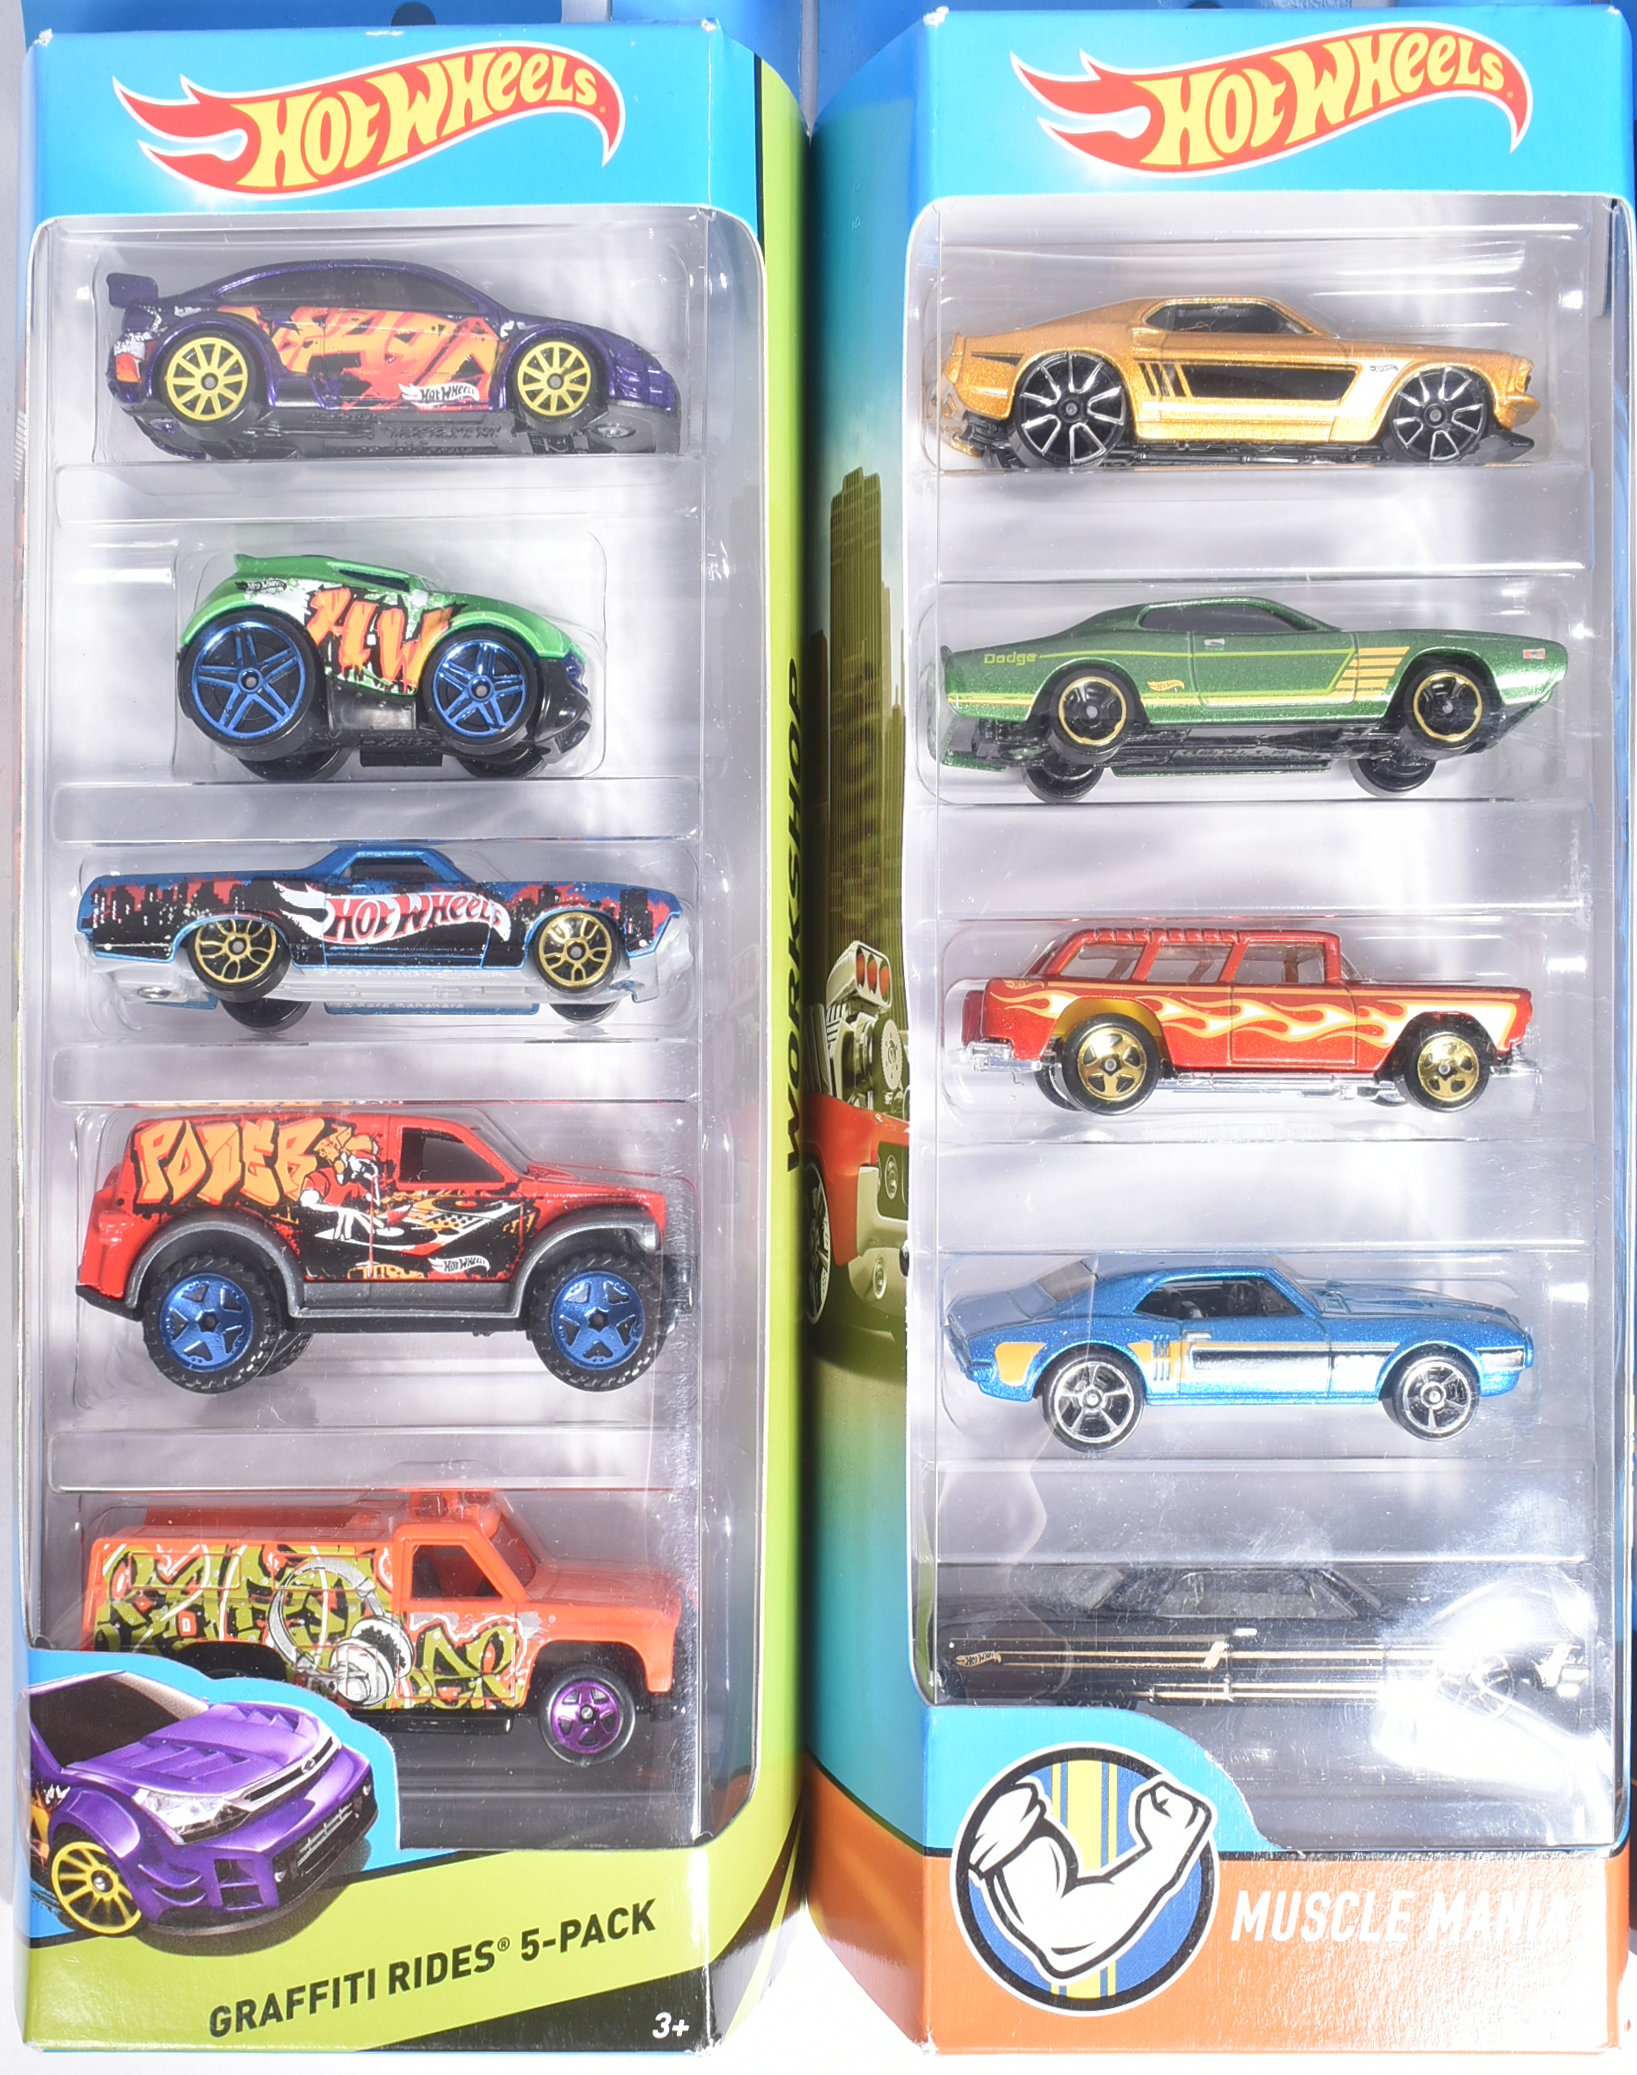 DIECAST - COLLECTION OF ASSORTED MATTEL HOT WHEEL DIECAST - Image 3 of 5